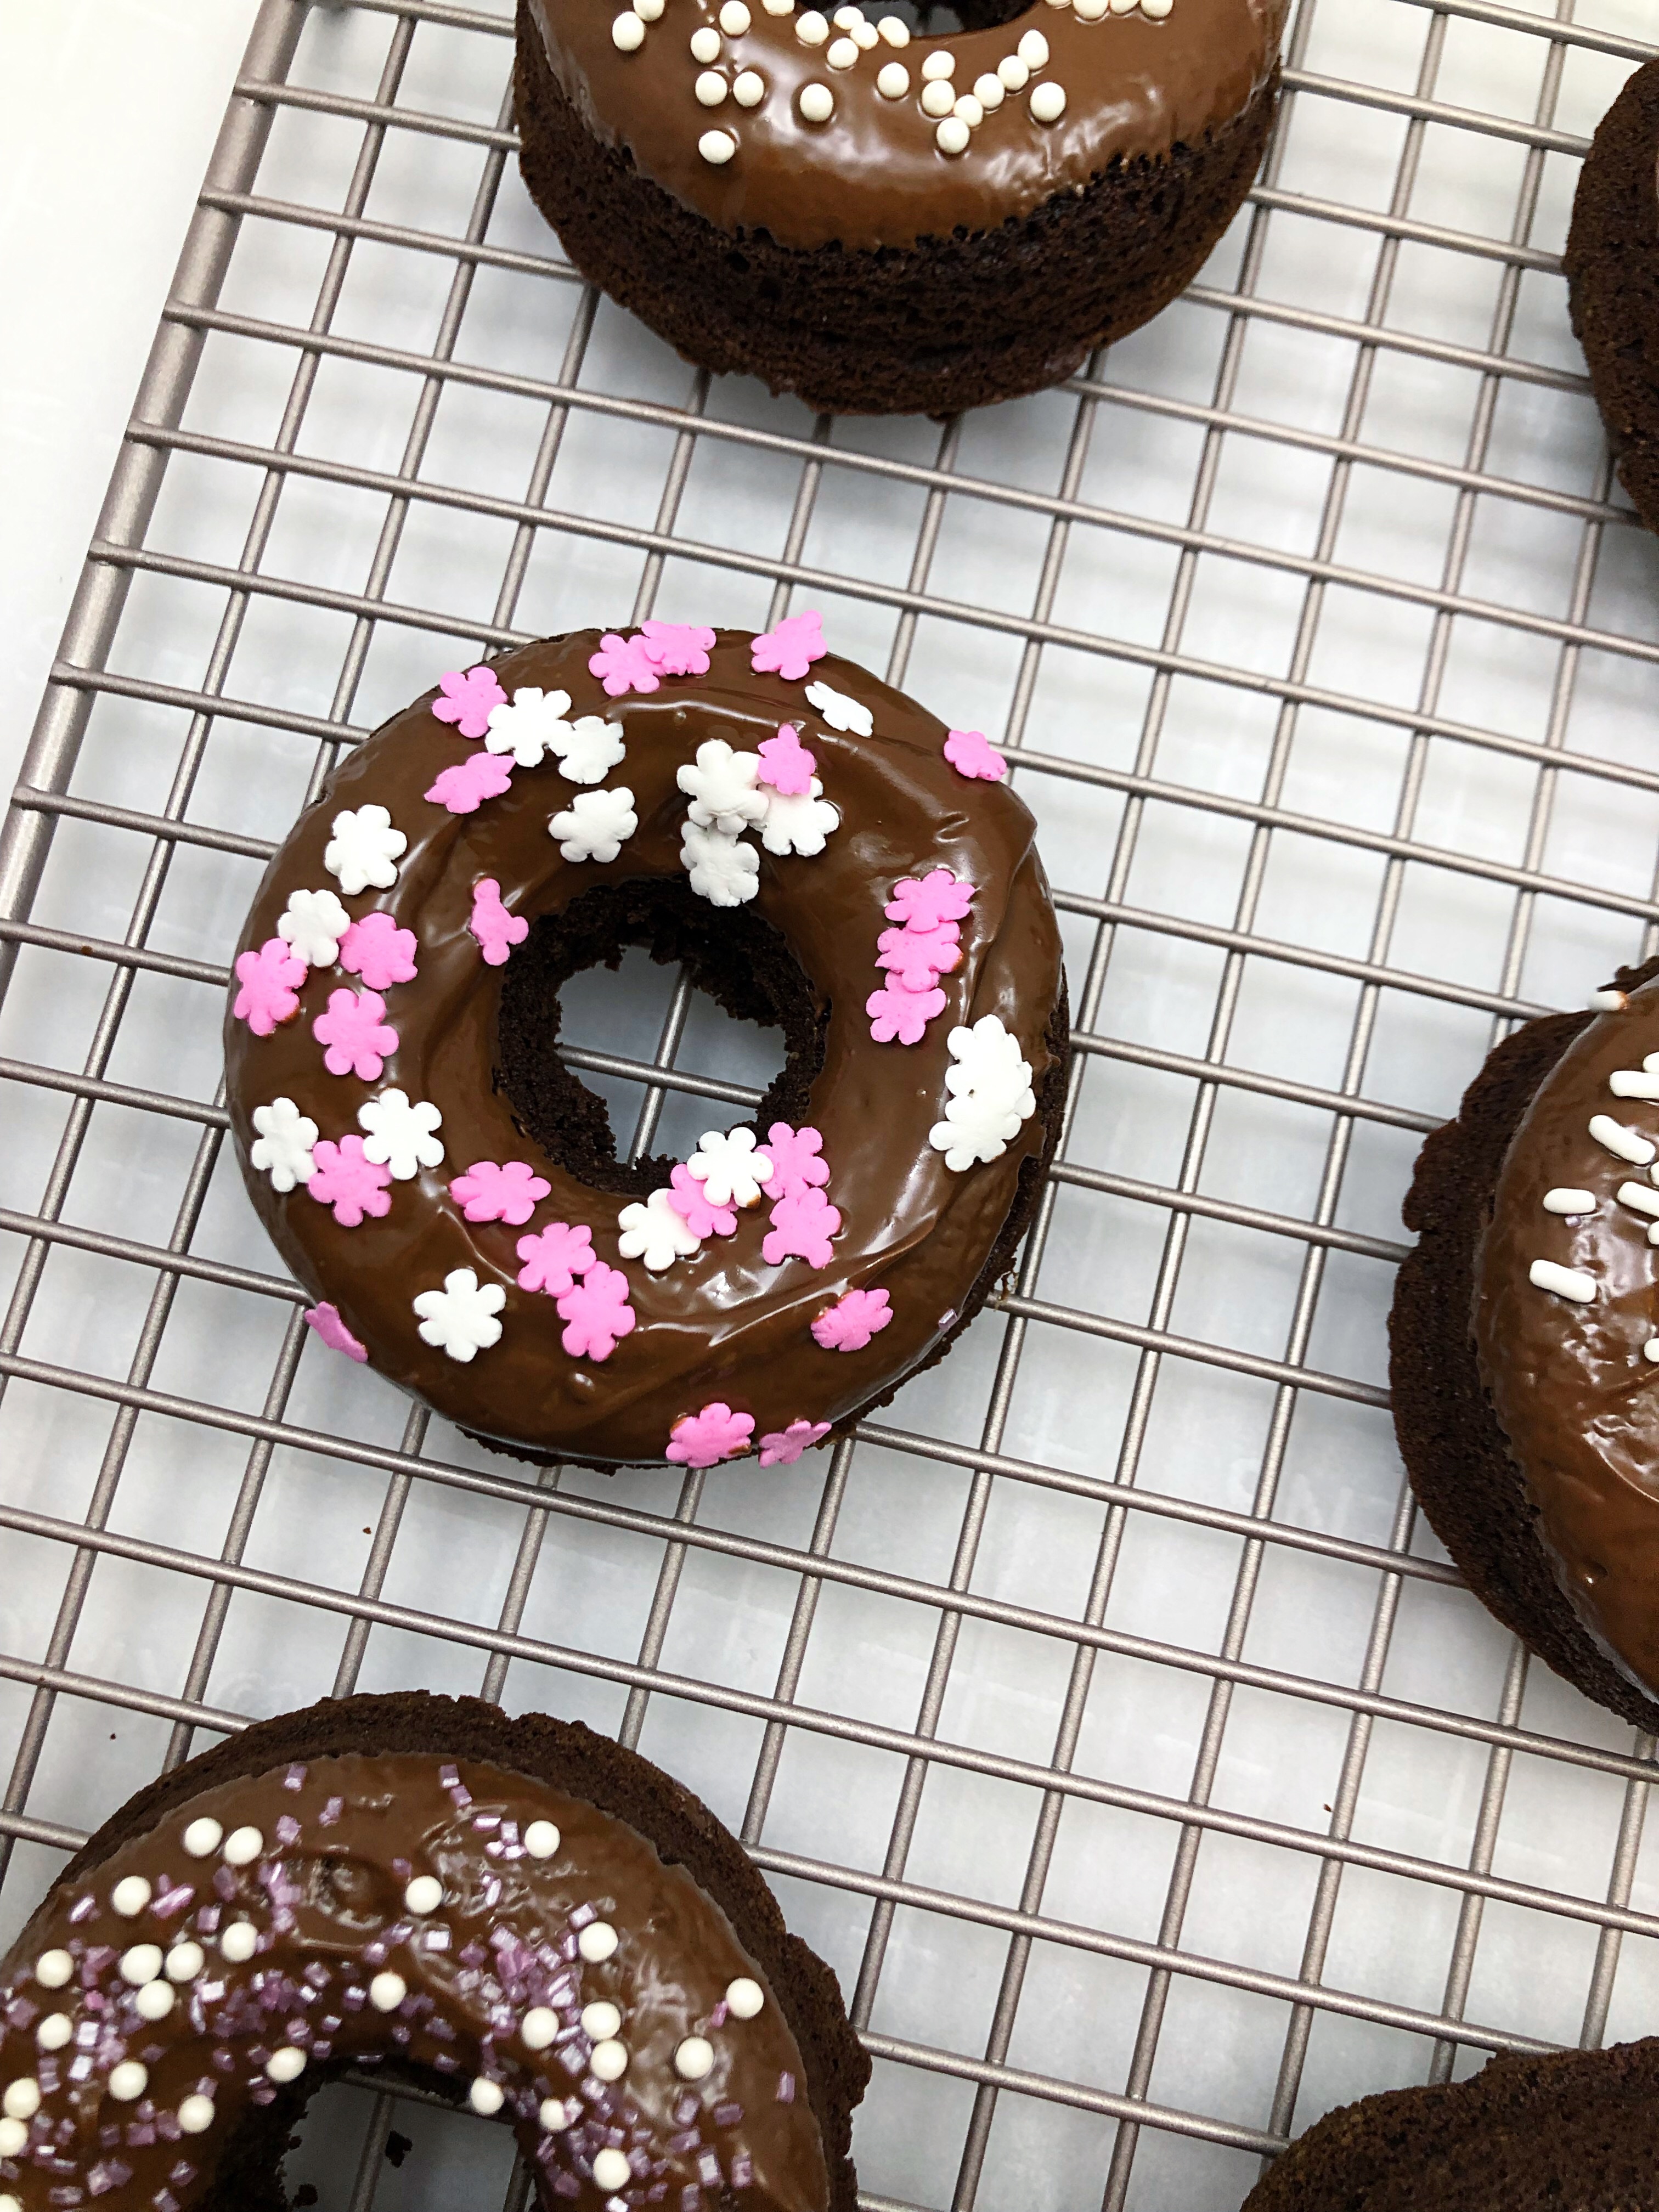 Paleo Chocolate Frosted Donuts